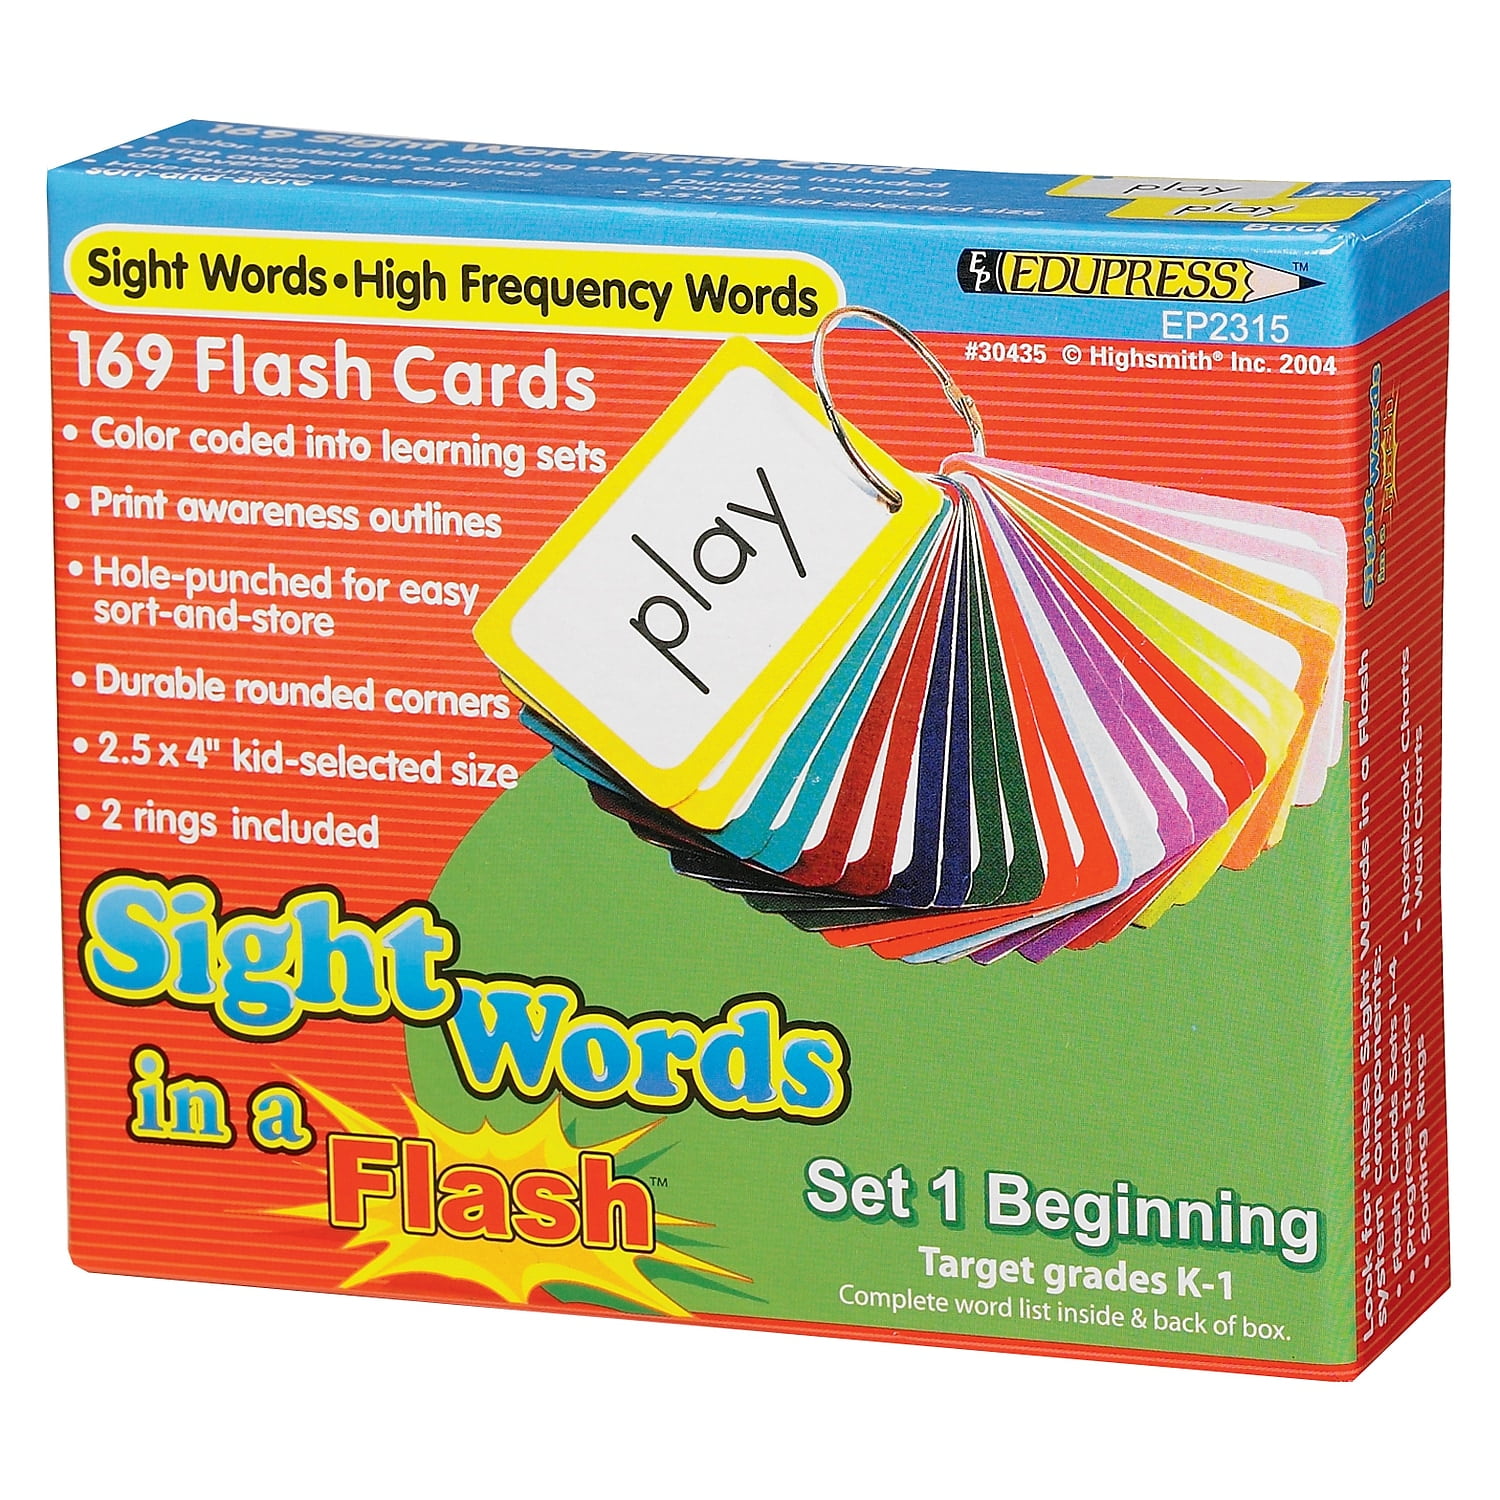 Edupress Sight Words in a Flash Learning System: Set 1, Beginning 